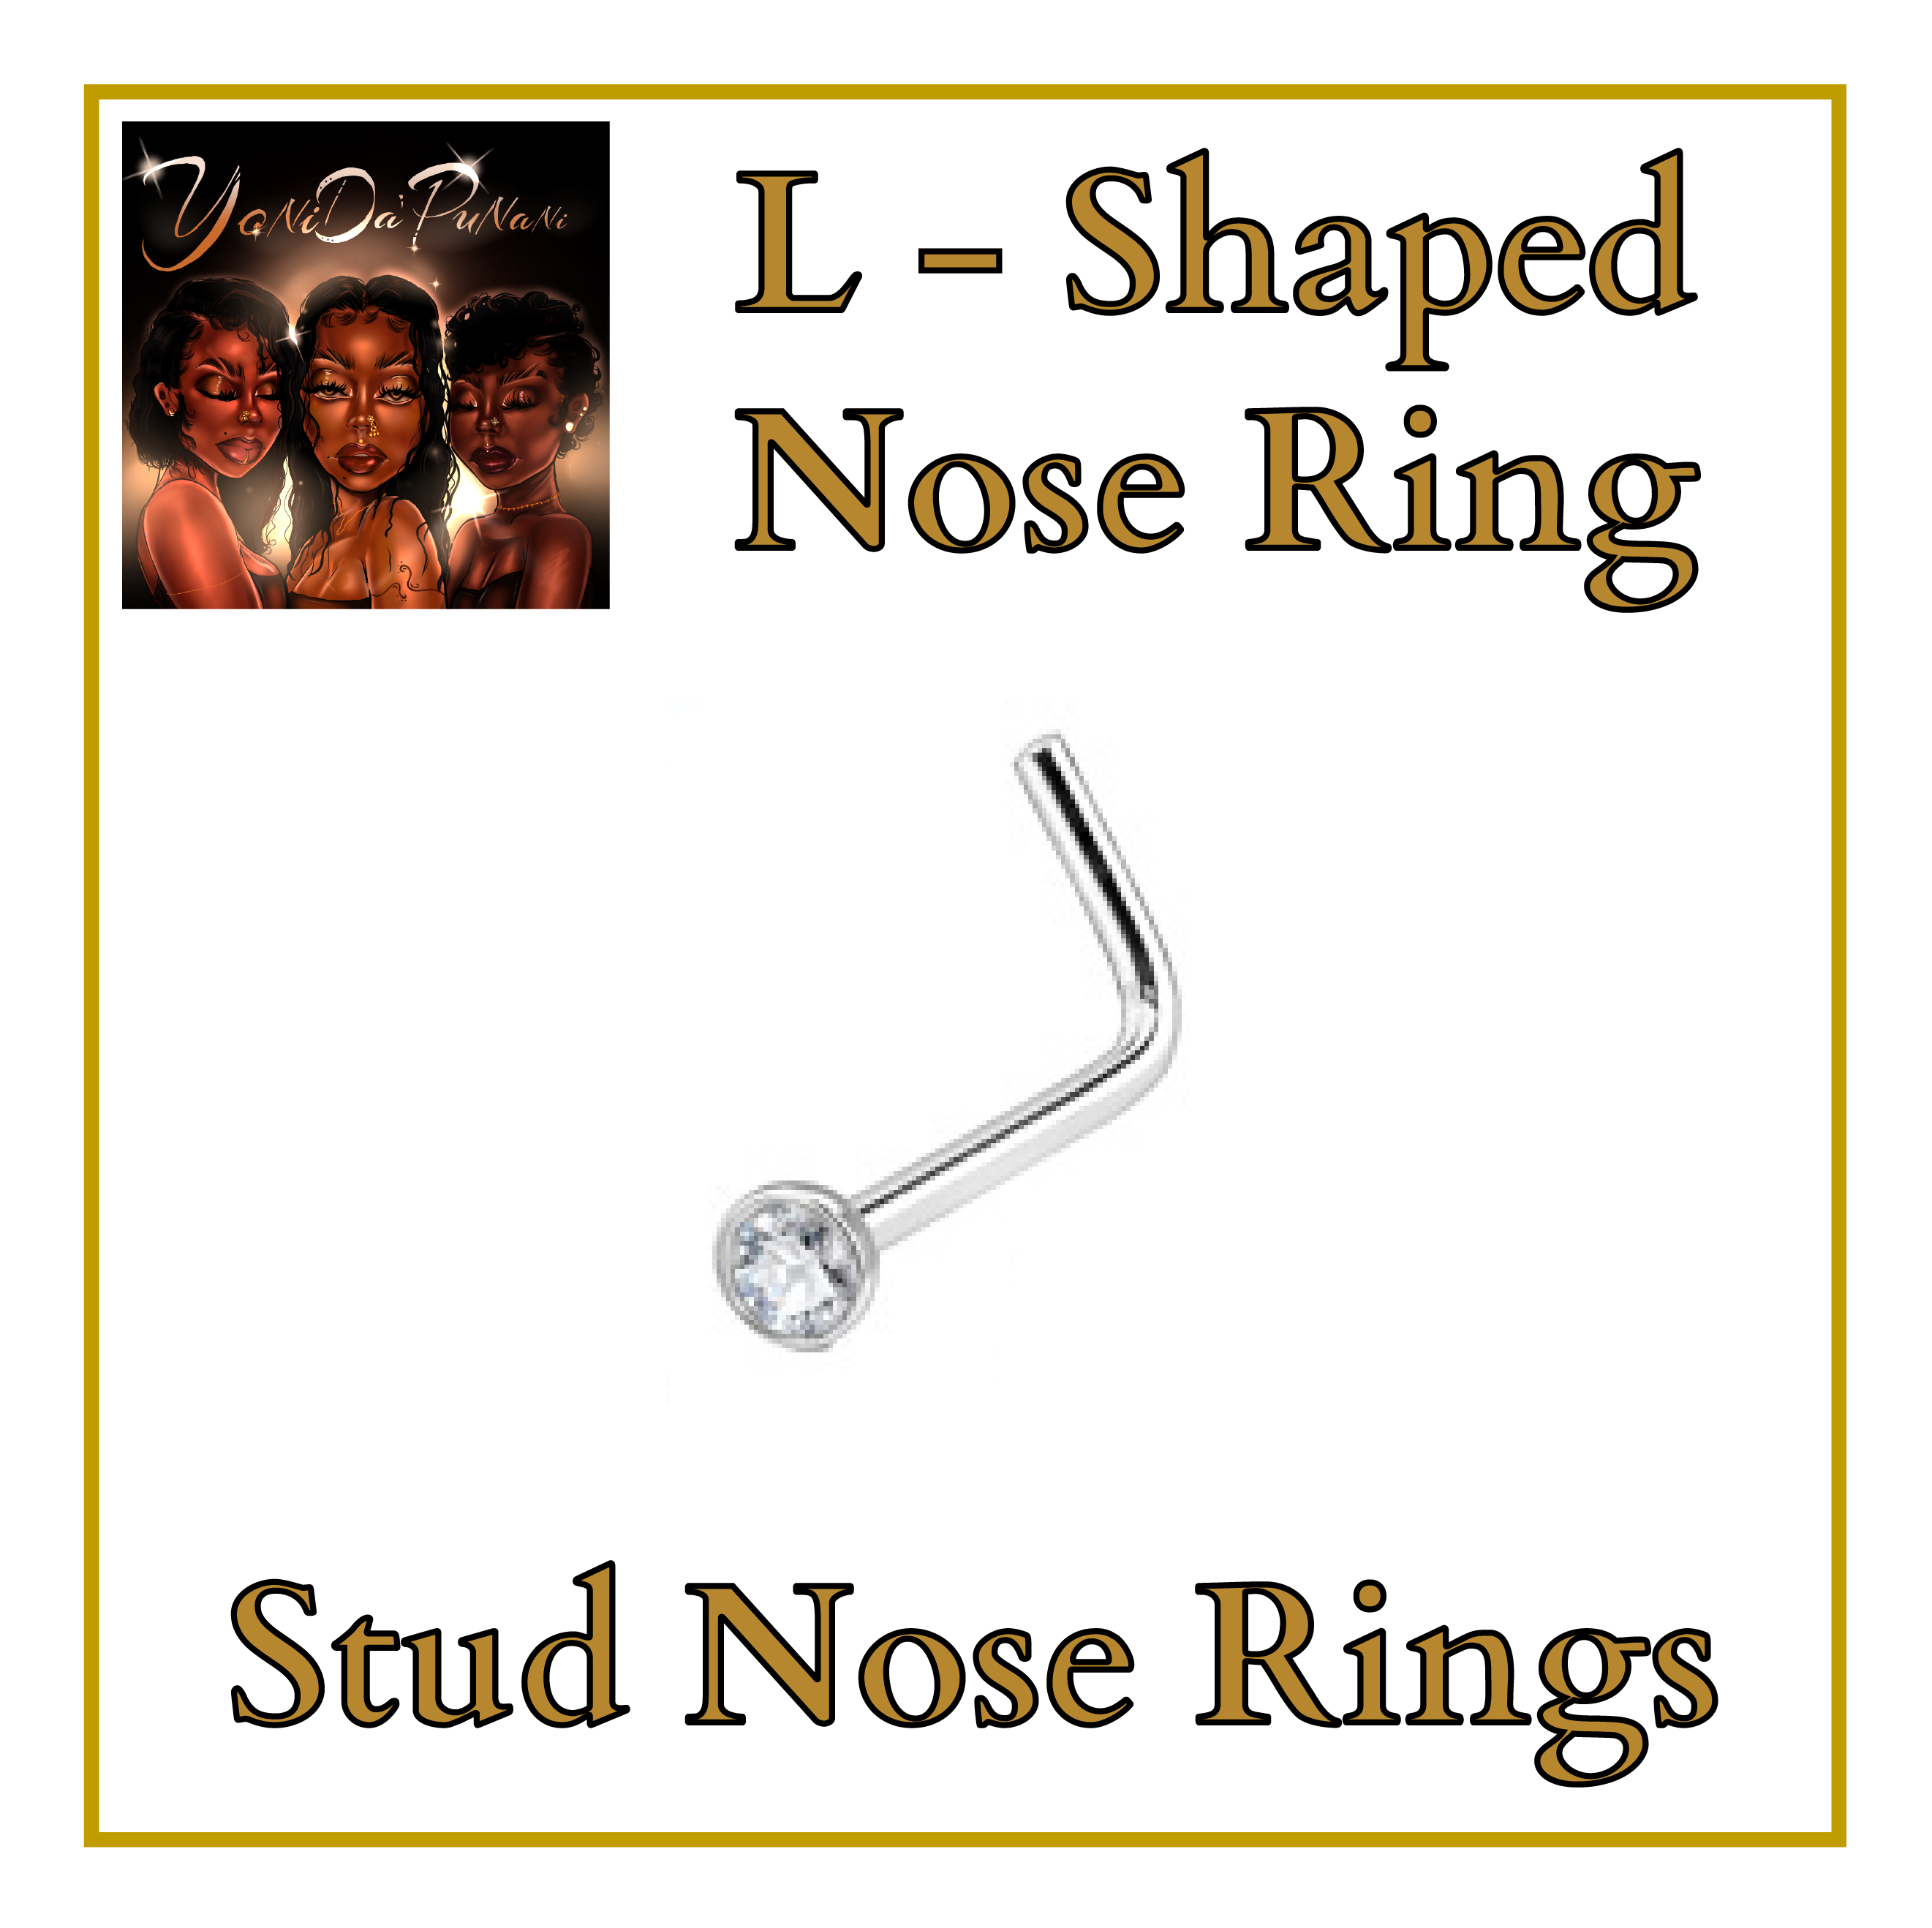 ZS 6pcs/lot Double Hoop Nose Ring Stainless Steel Twist Nose Piercing Screw  L-Shape Retainer Nostril Piercing Helix Earrings | L shaped nose ring, Nose  piercing, Nose rings hoop